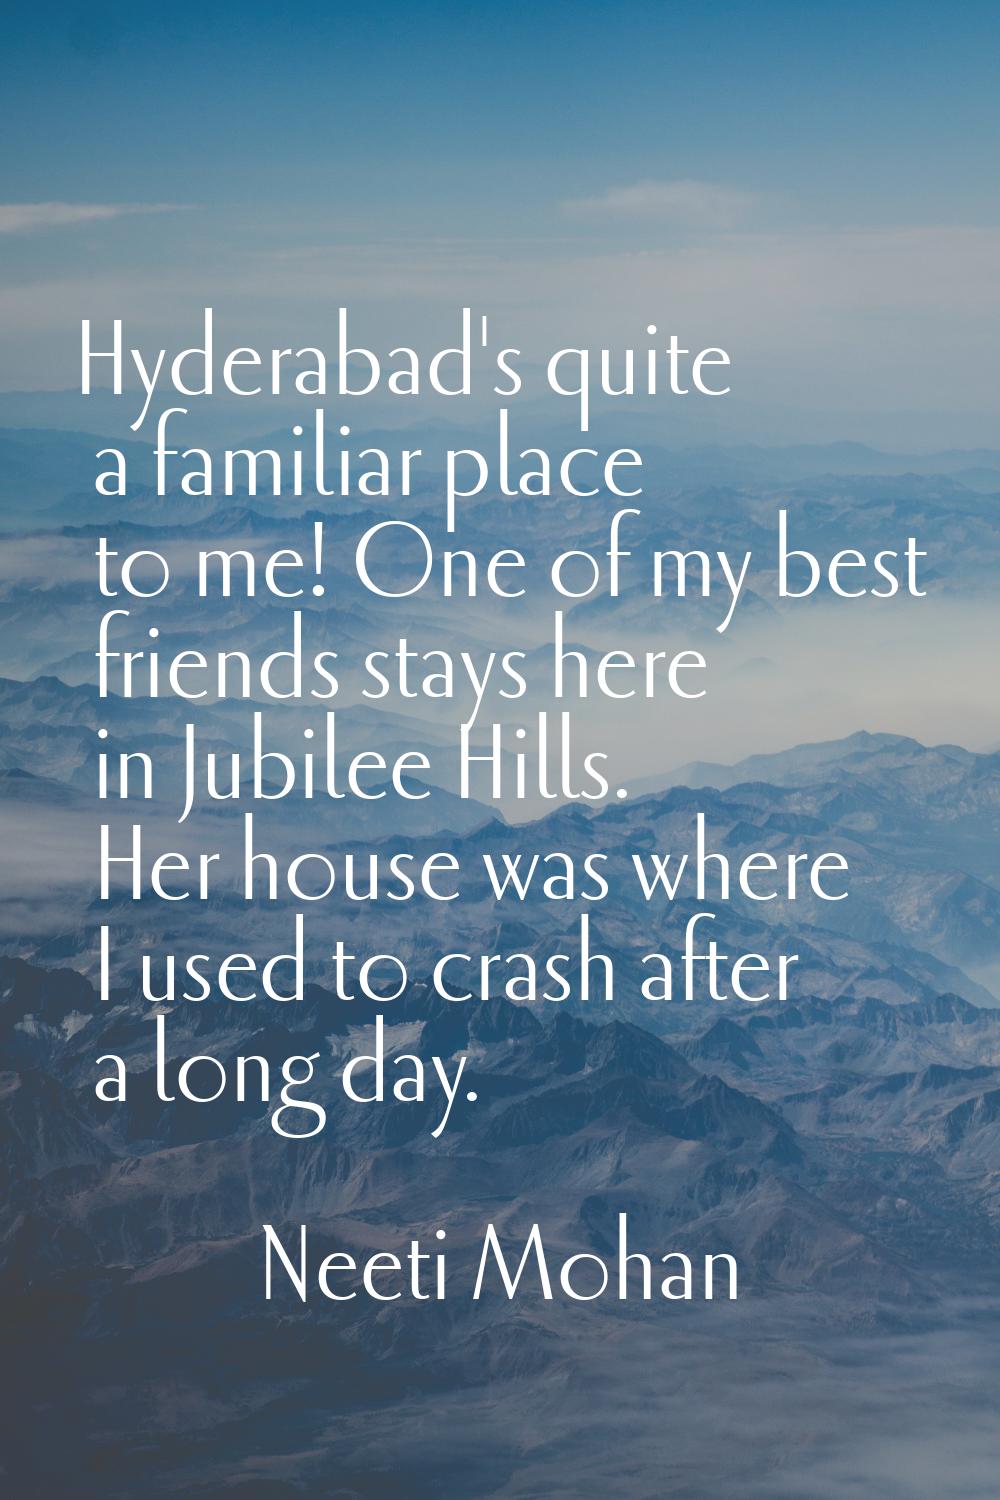 Hyderabad's quite a familiar place to me! One of my best friends stays here in Jubilee Hills. Her h